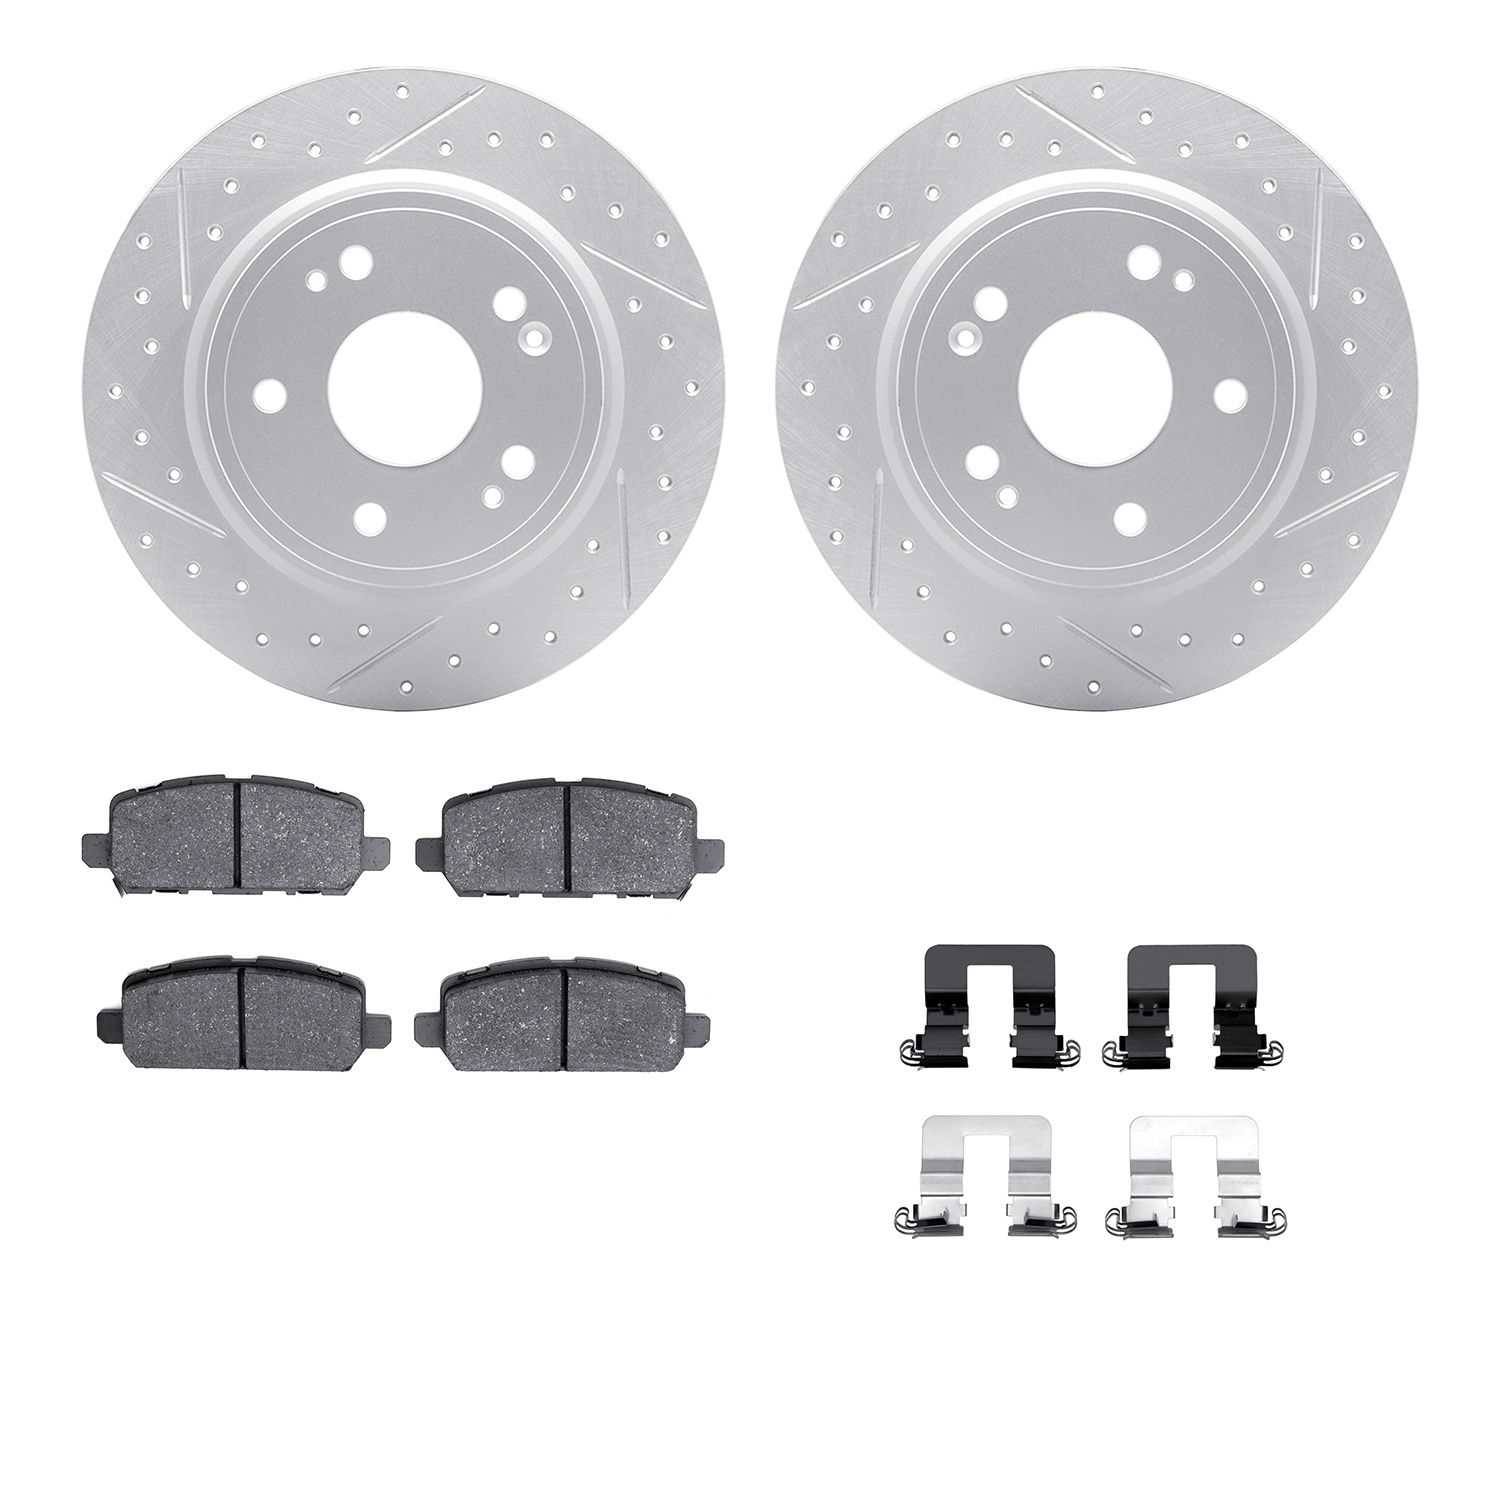 2512-59112 Geoperformance Drilled/Slotted Rotors w/5000 Advanced Brake Pads Kit & Hardware, Fits Select Acura/Honda, Position: R